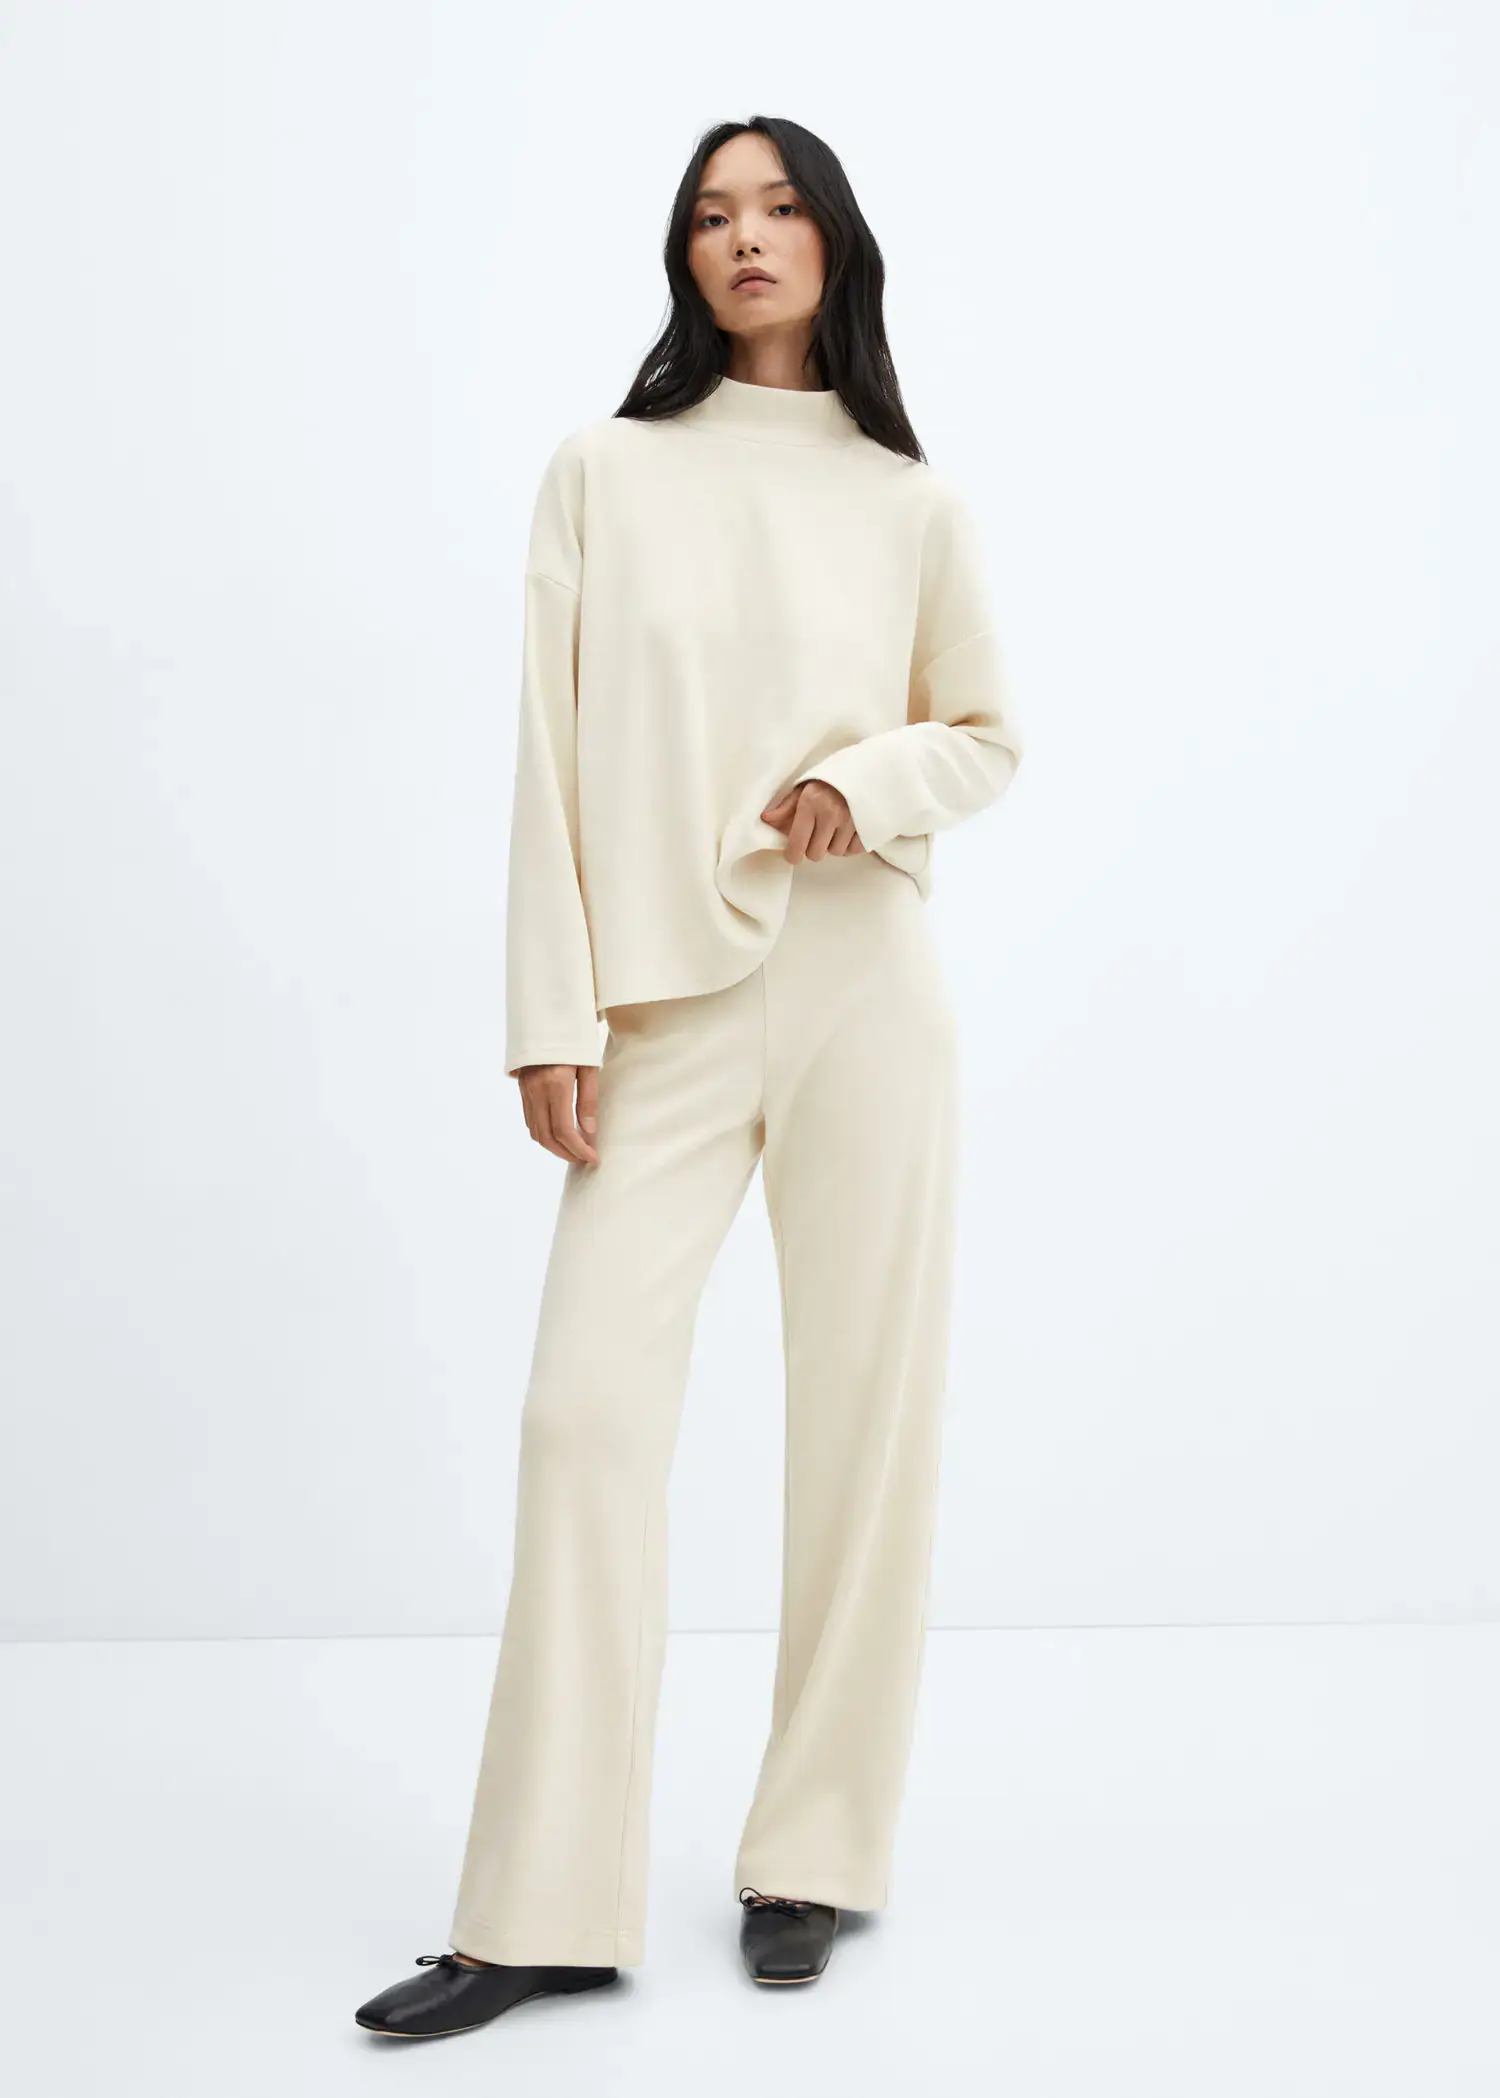 Buy Gap High Rise Wide-Leg Corduroy Trousers from the Gap online shop